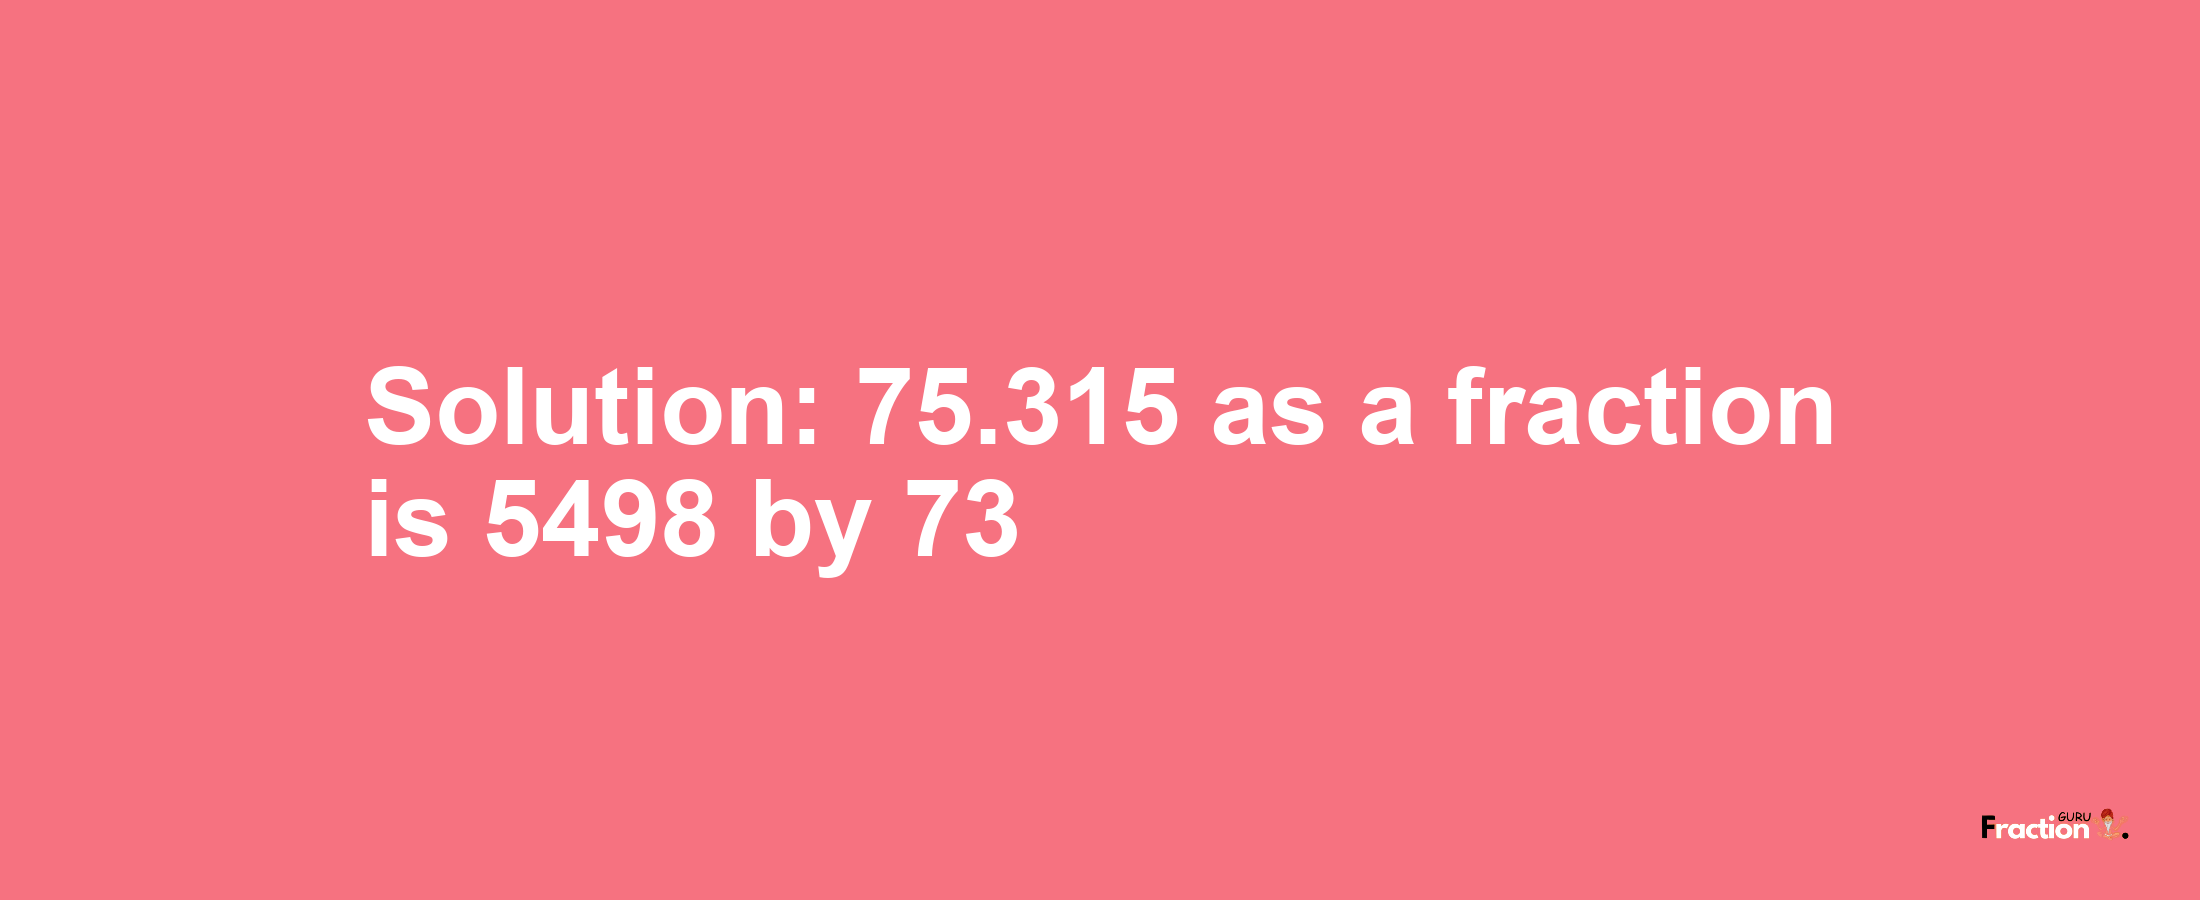 Solution:75.315 as a fraction is 5498/73